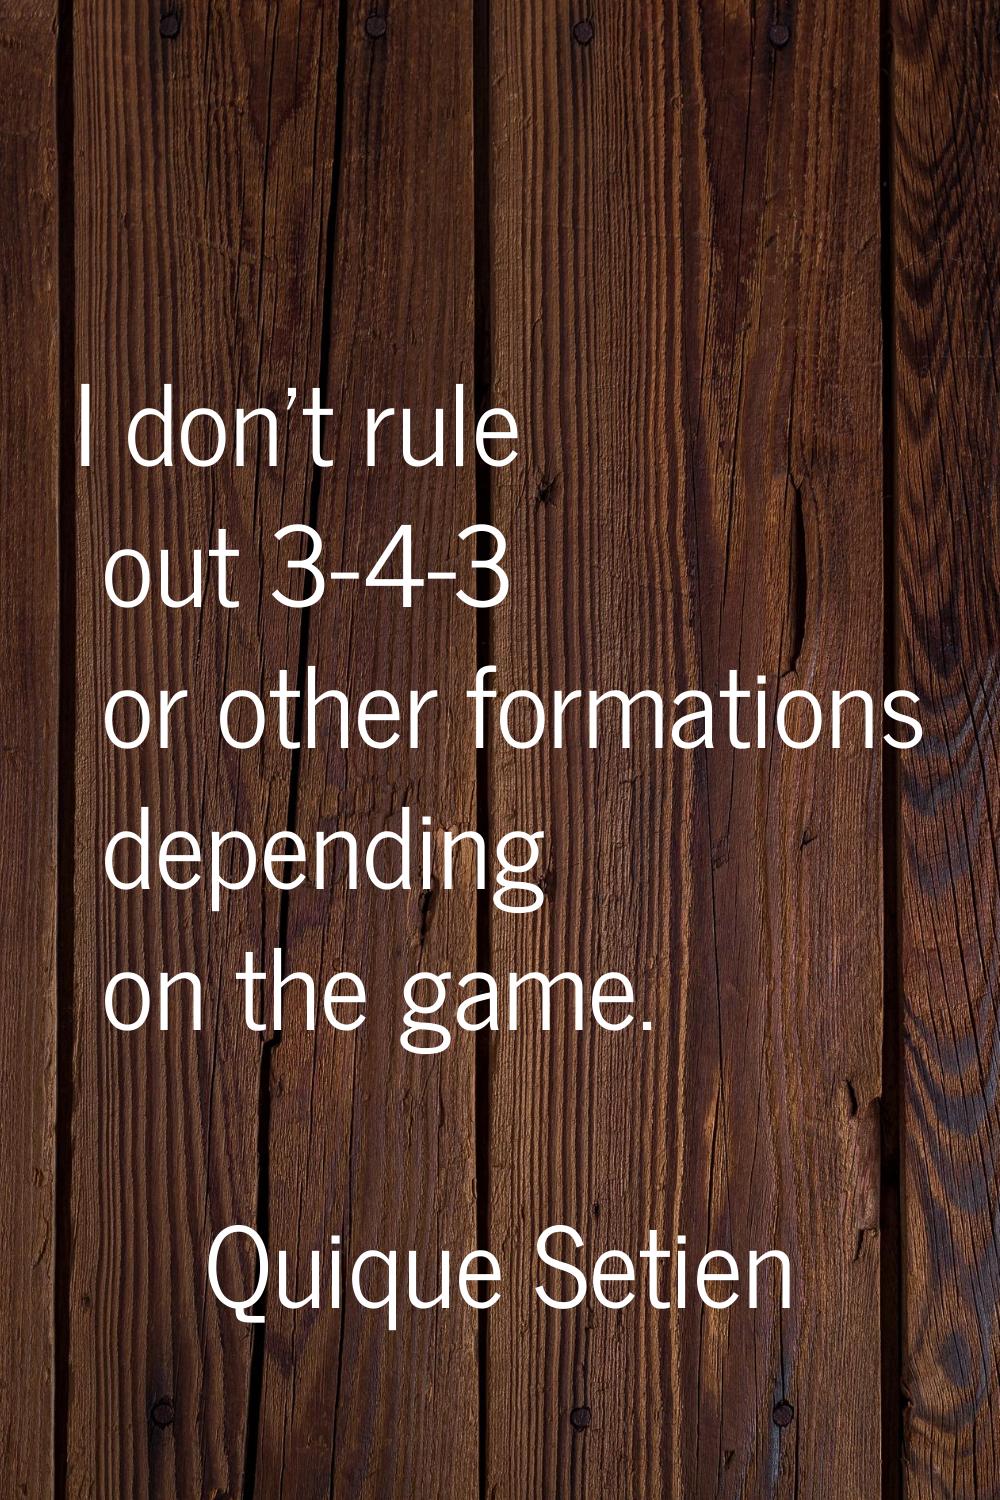 I don't rule out 3-4-3 or other formations depending on the game.